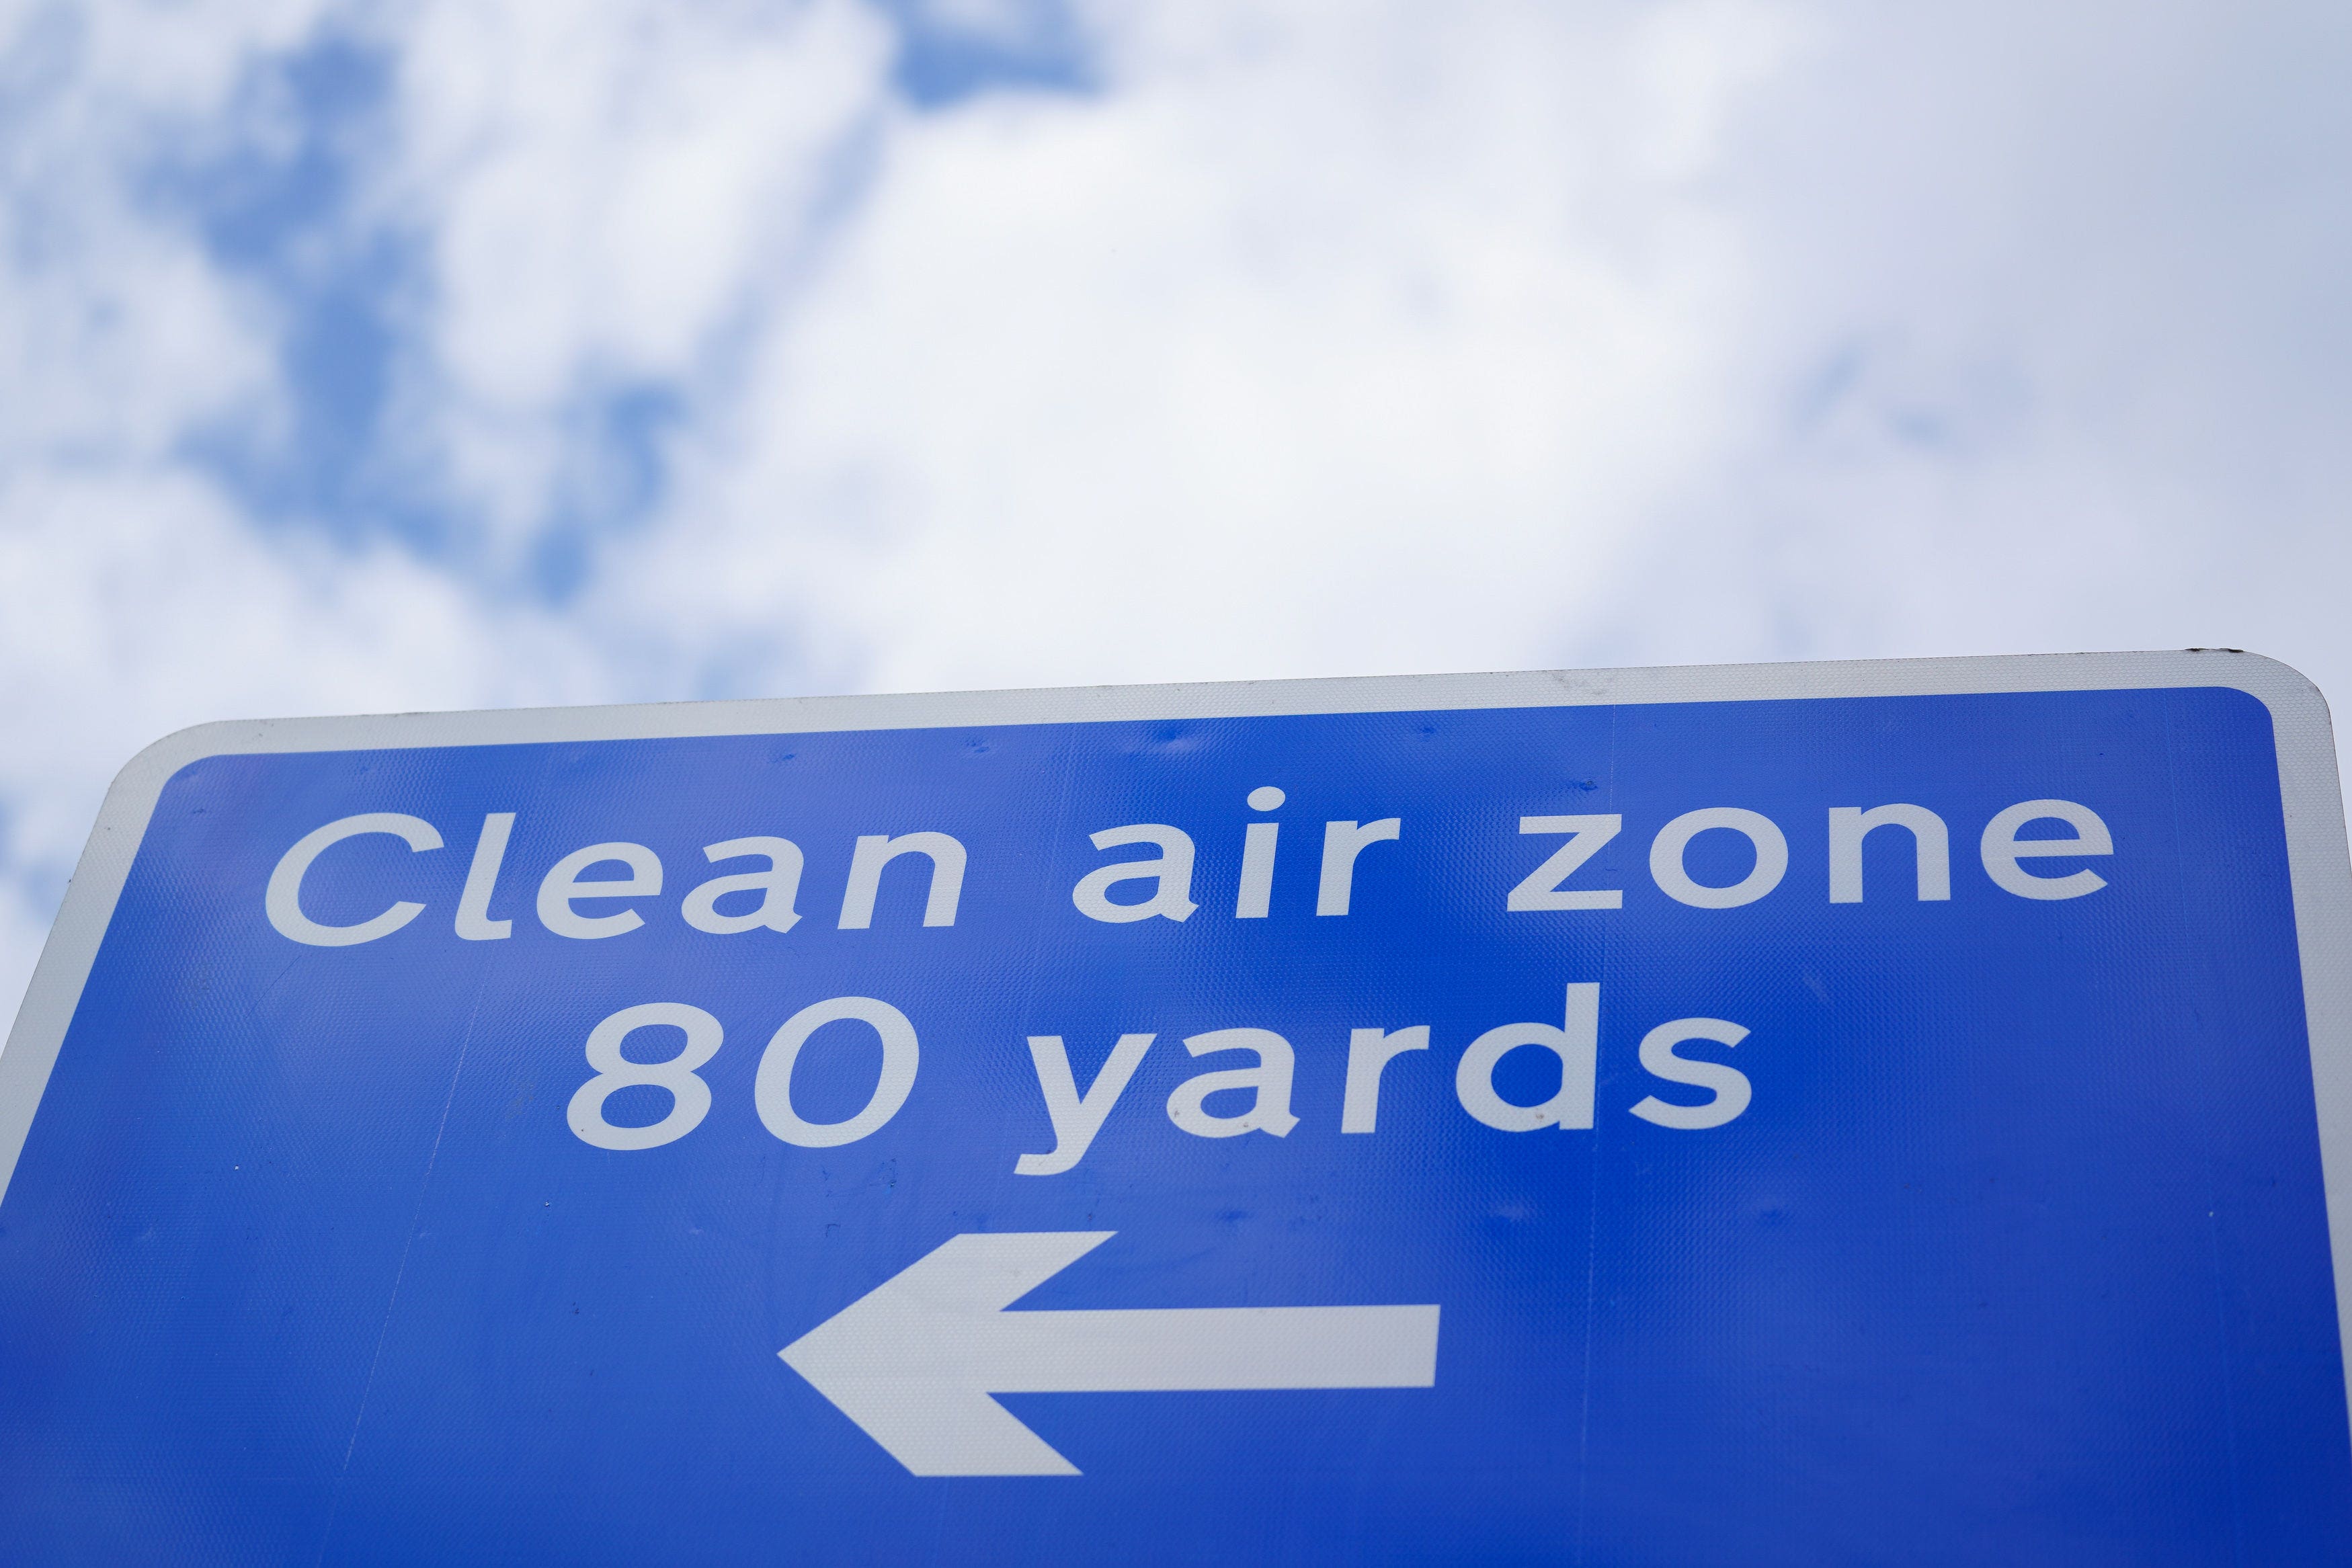 Bristol’s Clean Air Zone (CAZ) launched in November 2022 after the government ordered certain cities to reduce nitrogen dioxide pollution in the shortest possible time